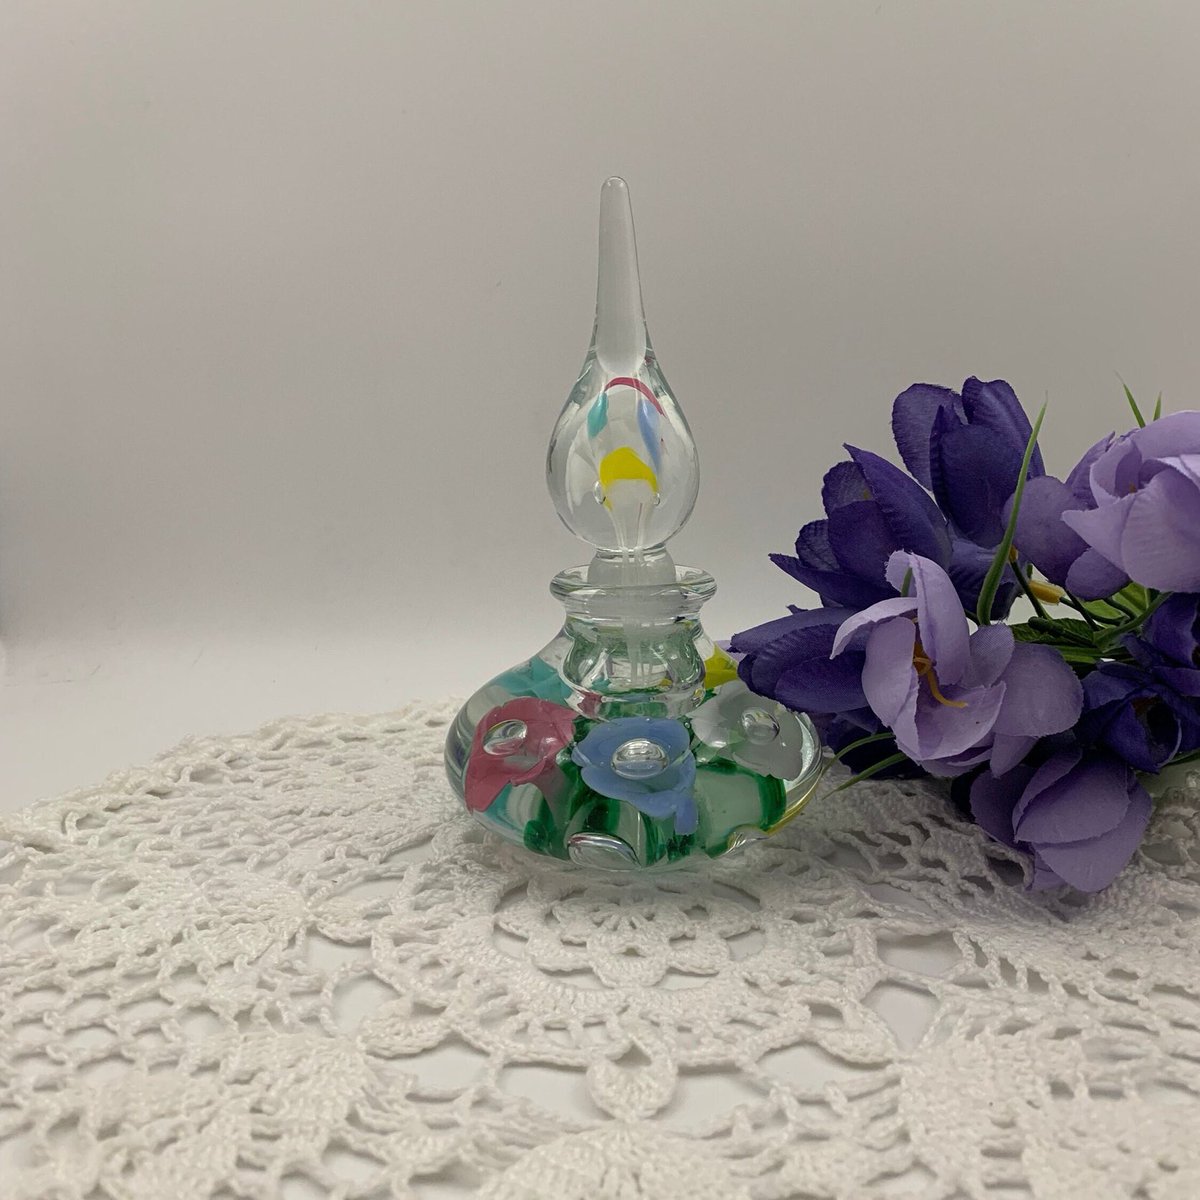 Excited to share this item from my #etsy shop: Vintage 1987 Gibson Perfume Bottle with Dauber, Retro 7” Vintage Tear Drop Art Glass, Cottage Core Chic, Vanity Dresser Decor, Gift for Her #teardrop #artglass #perfumebottle #vintagegibson #homedecor etsy.me/454AcZg